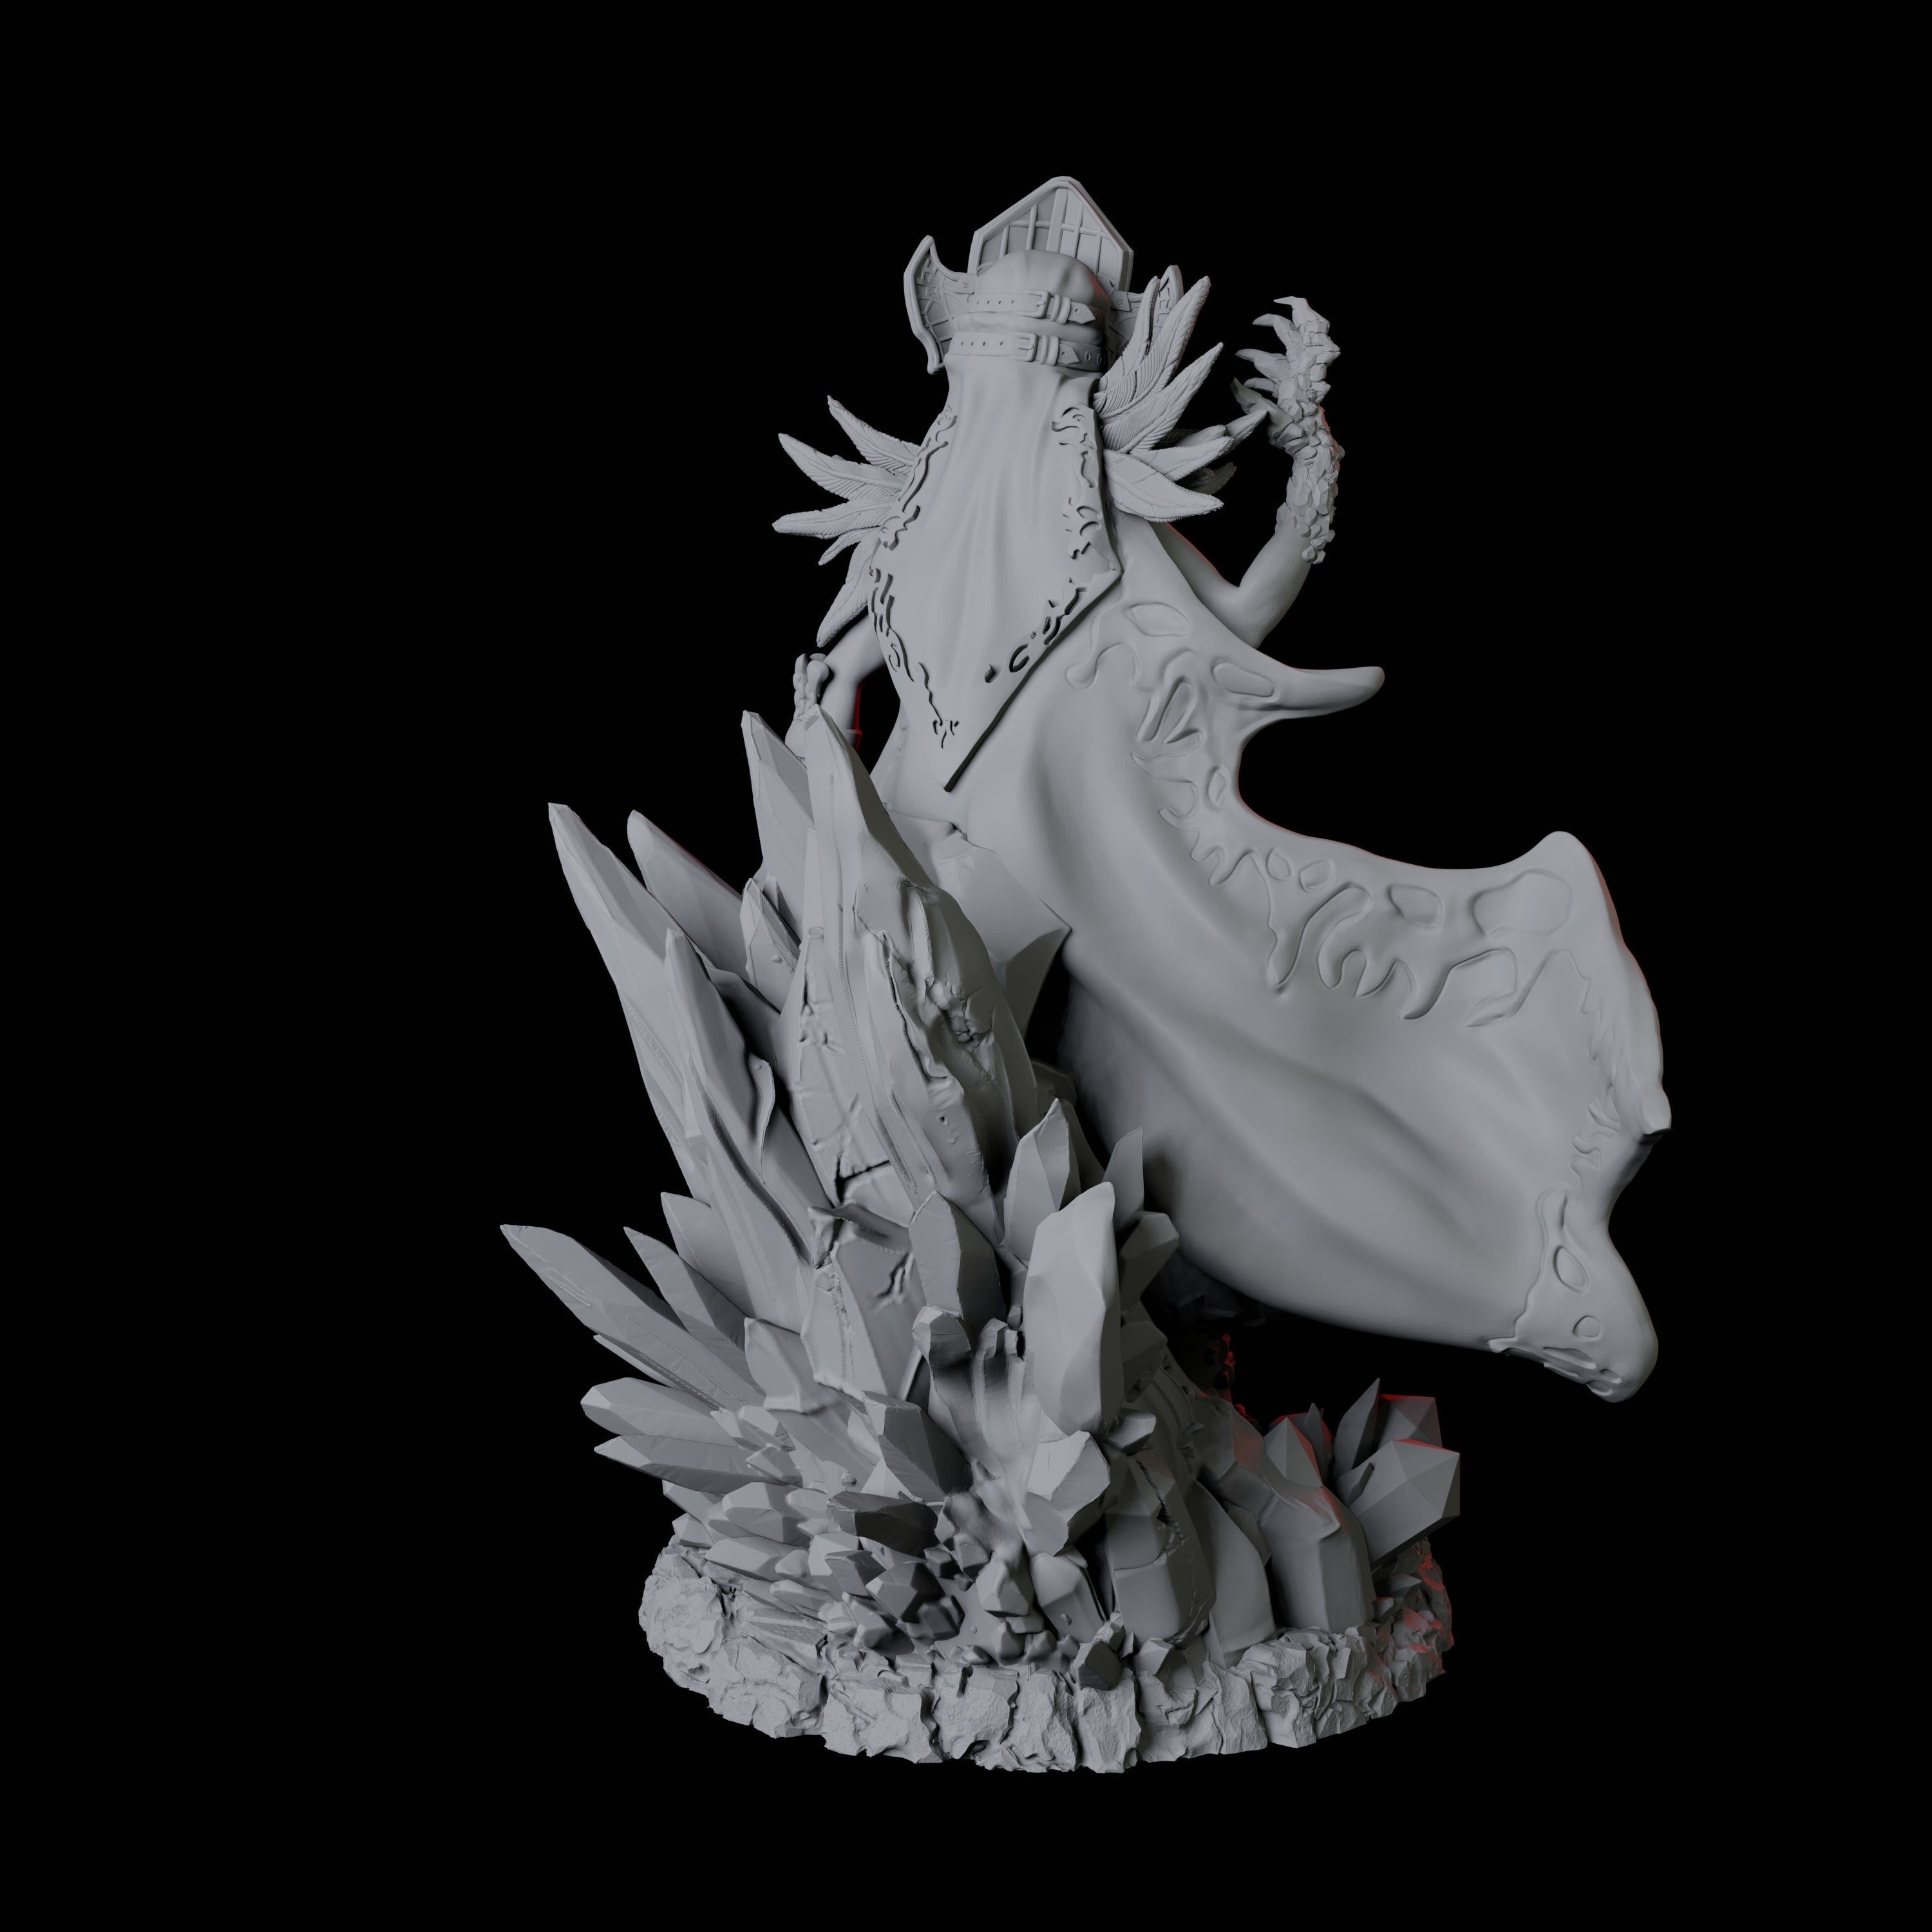 Ice Sorceress Miniature for Dungeons and Dragons, Pathfinder or other TTRPGs